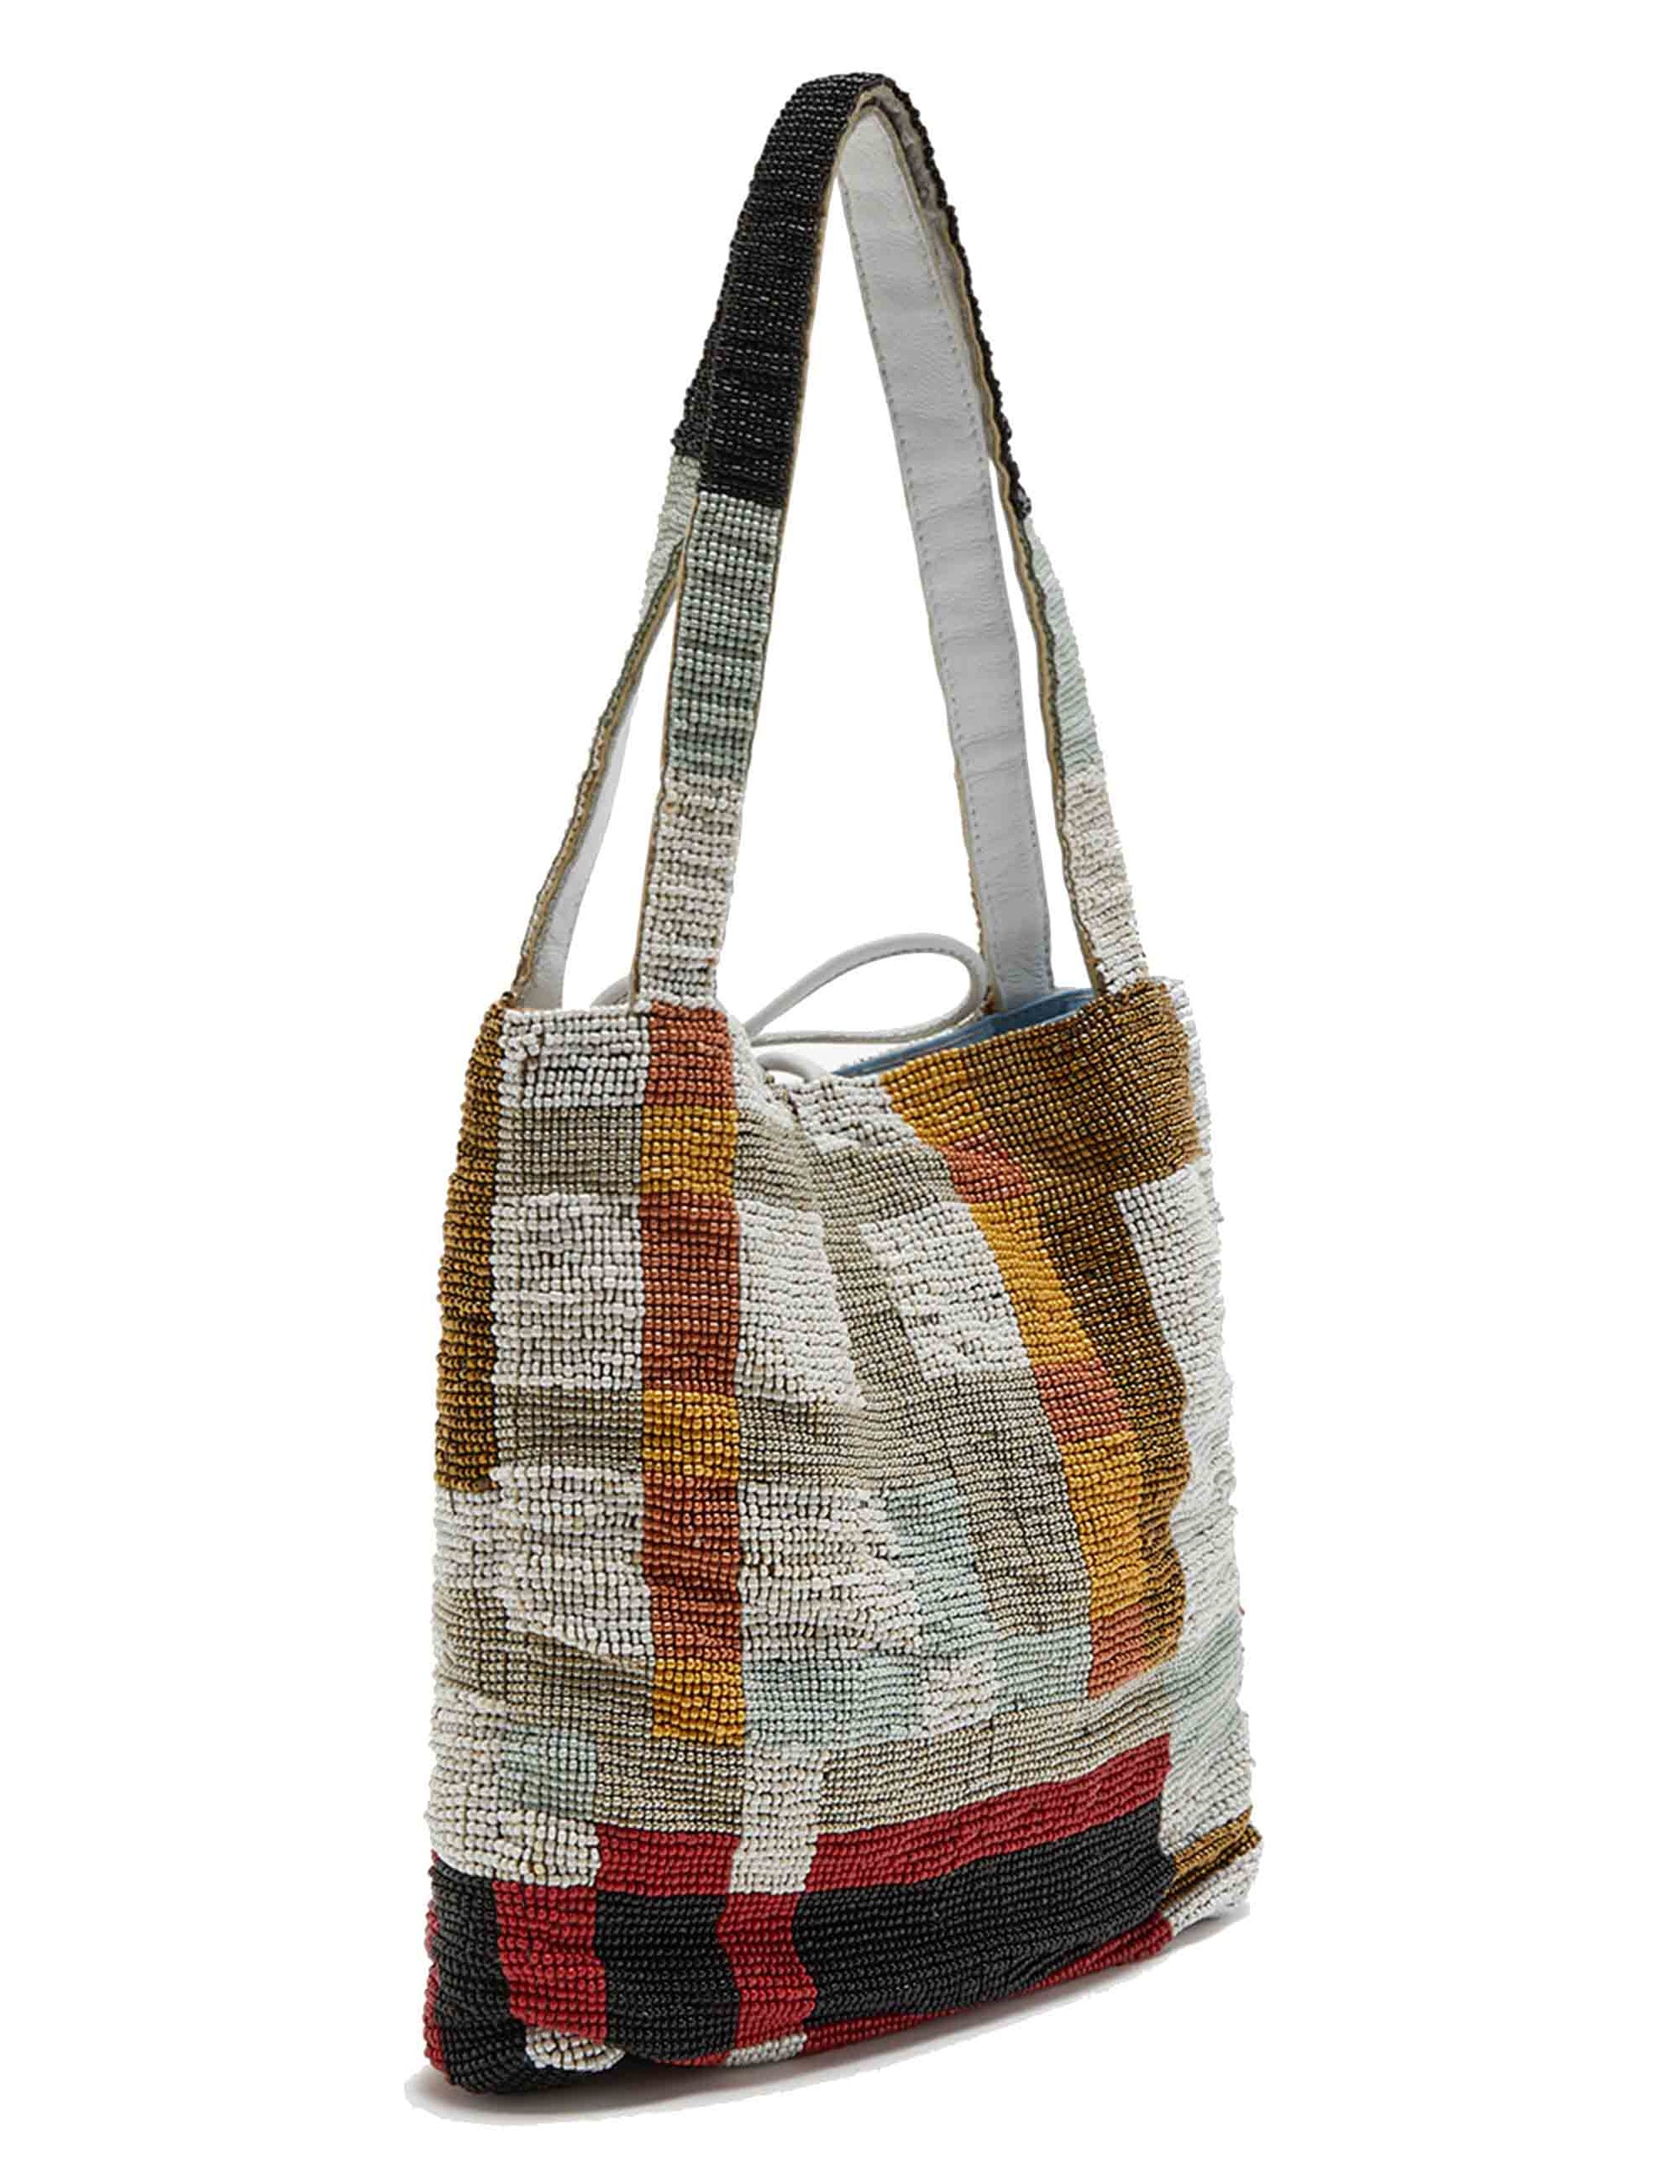 Multicheck women's shoulder bags in gray beads and leather tassels